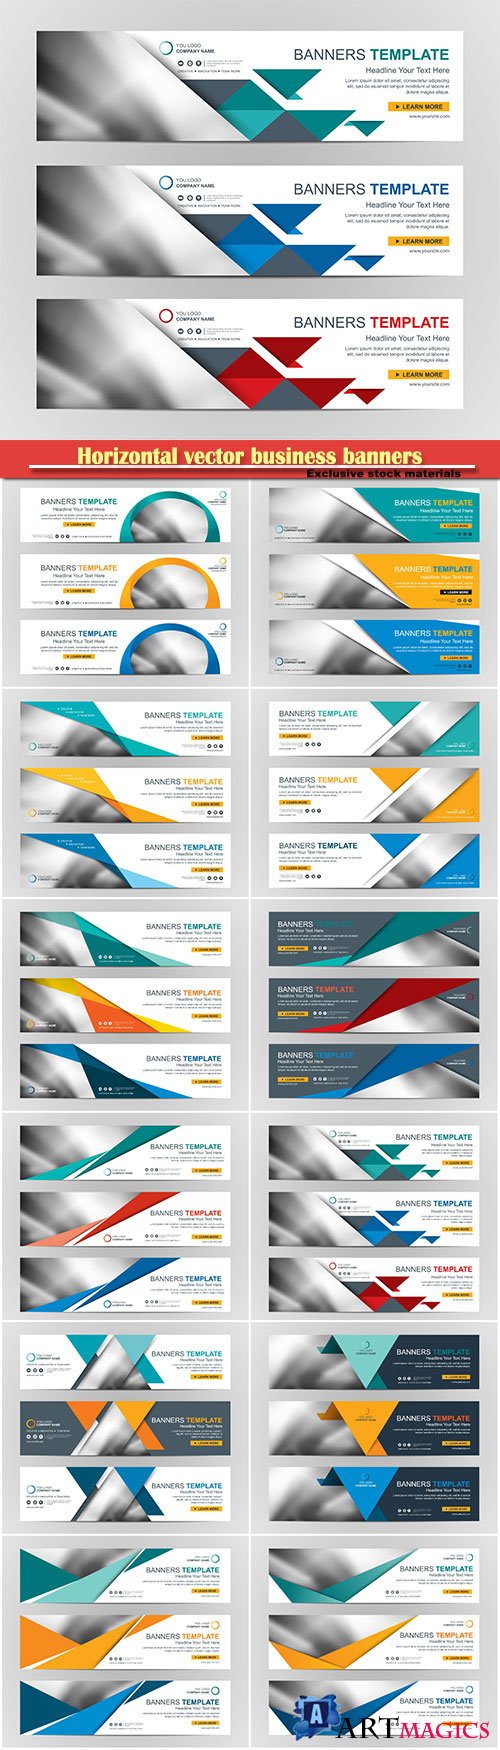 Horizontal vector business banners # 2